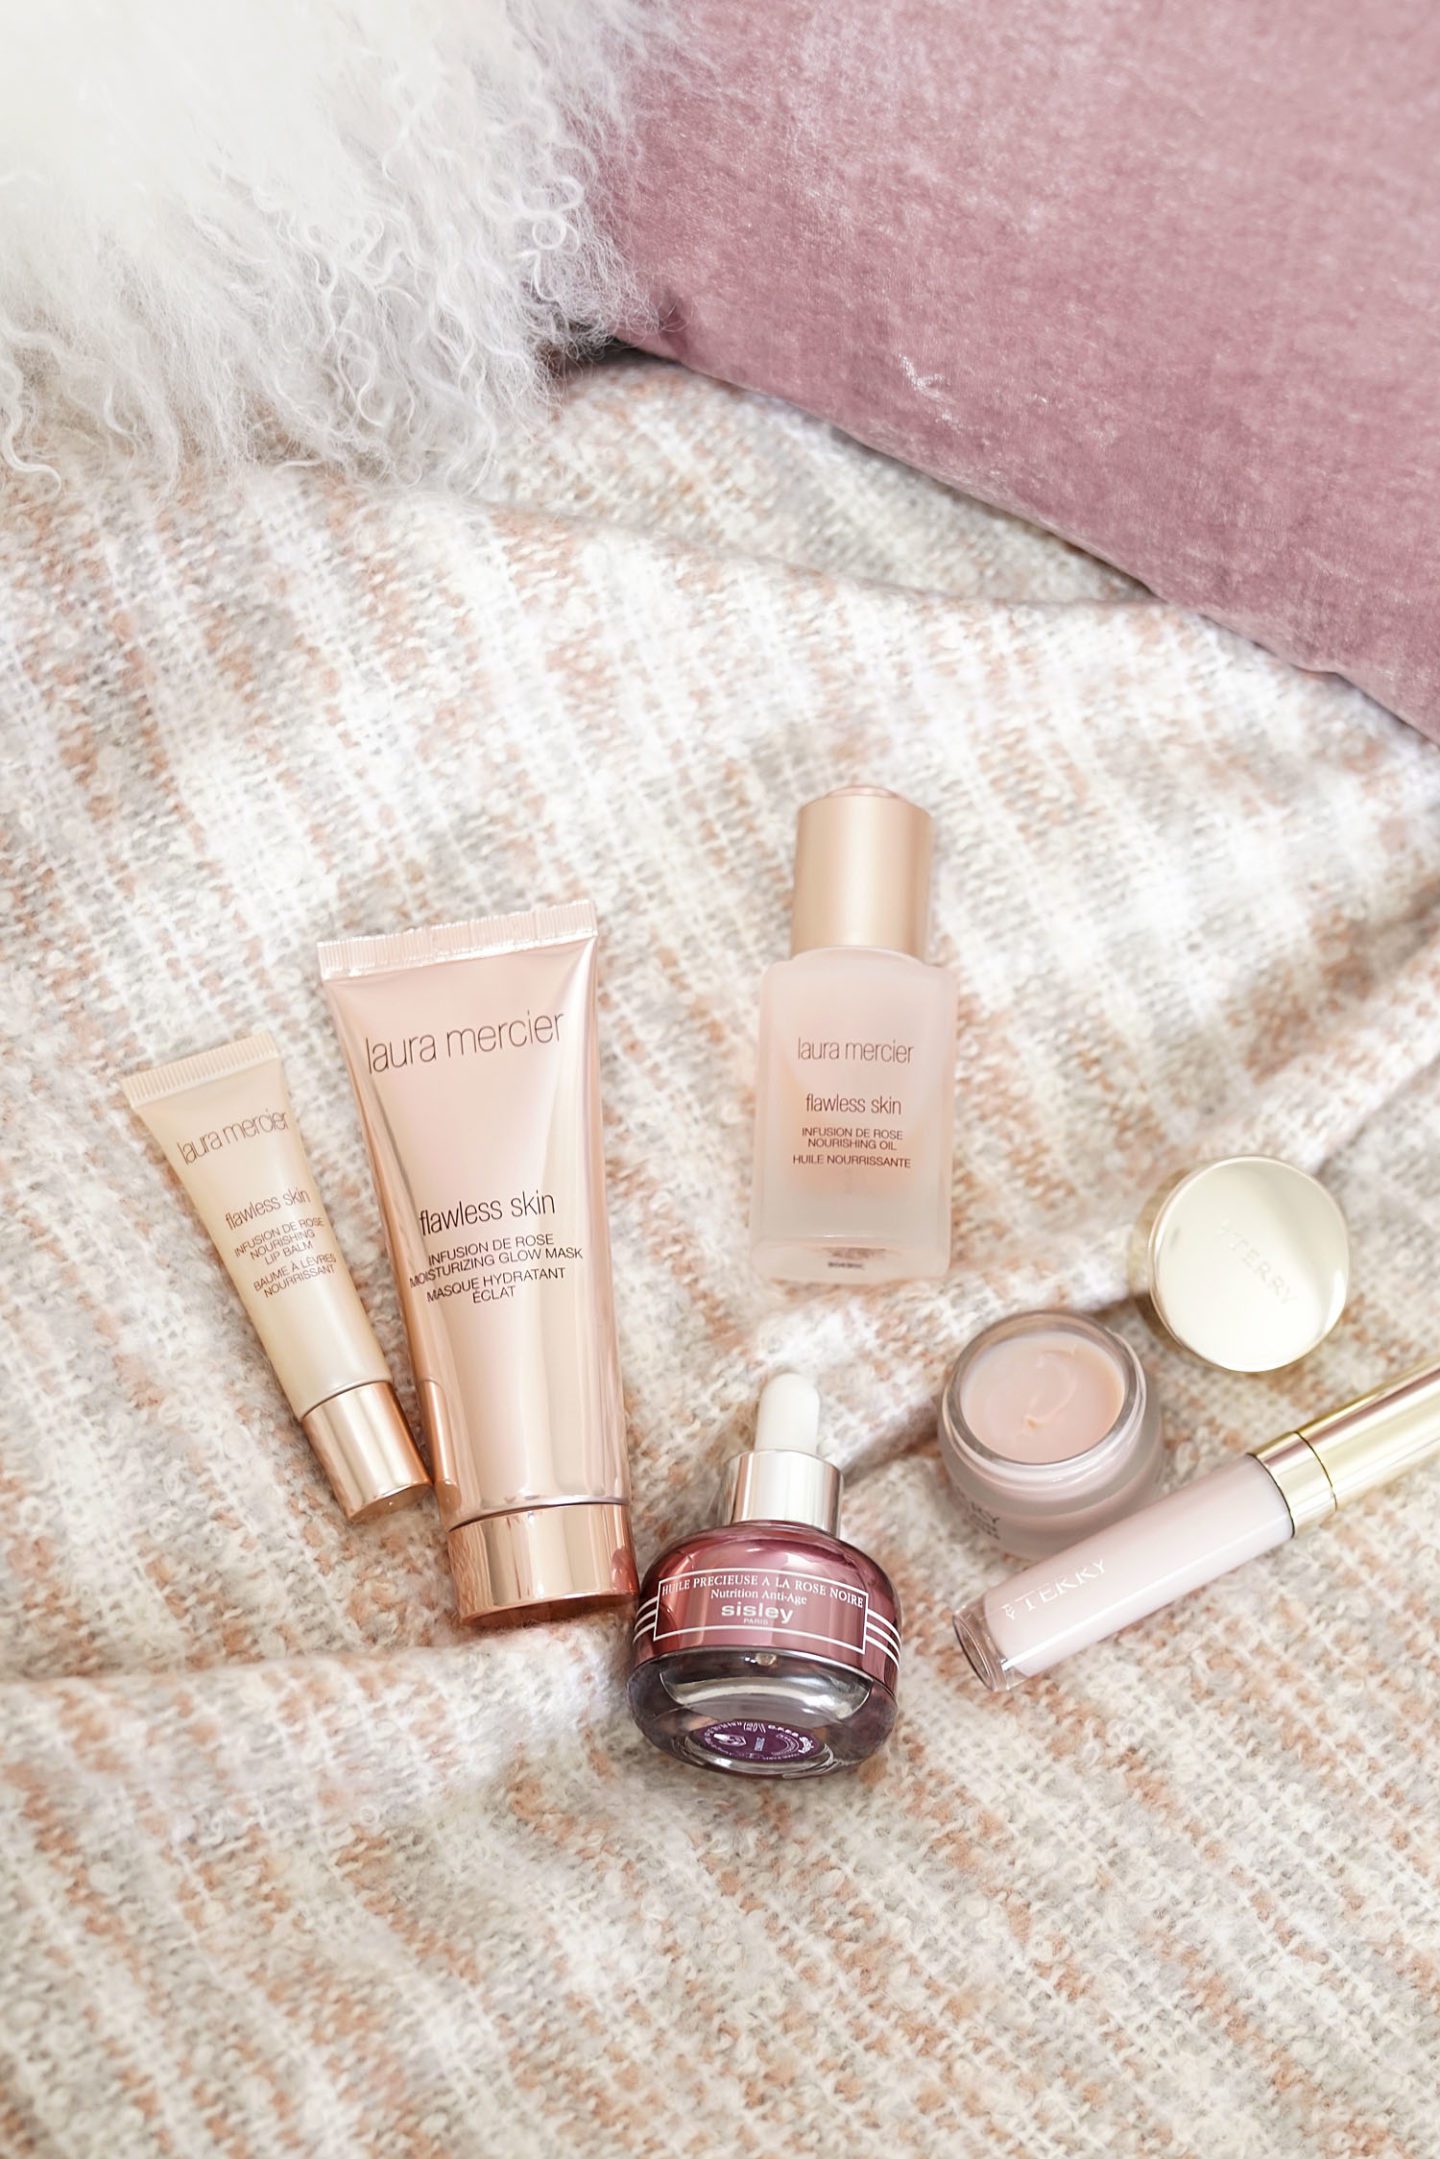 Best Rose Skincare Laura Mercier, Fresh, Sisley and By Terry